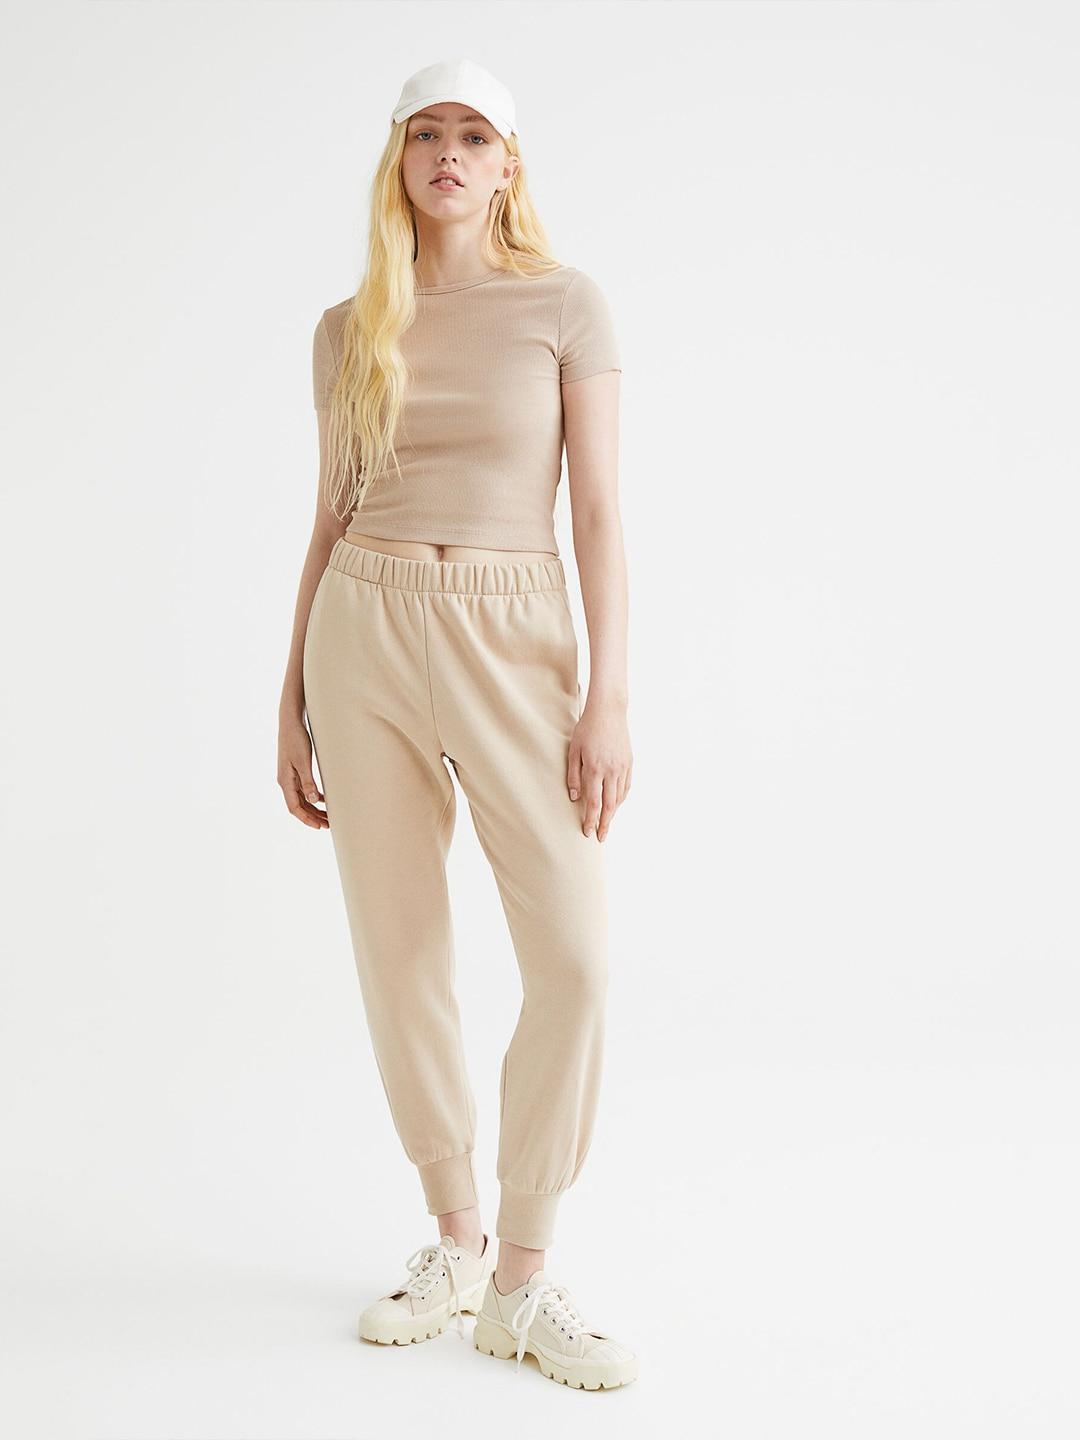 h&m-women-beige-ribbed-cropped-top